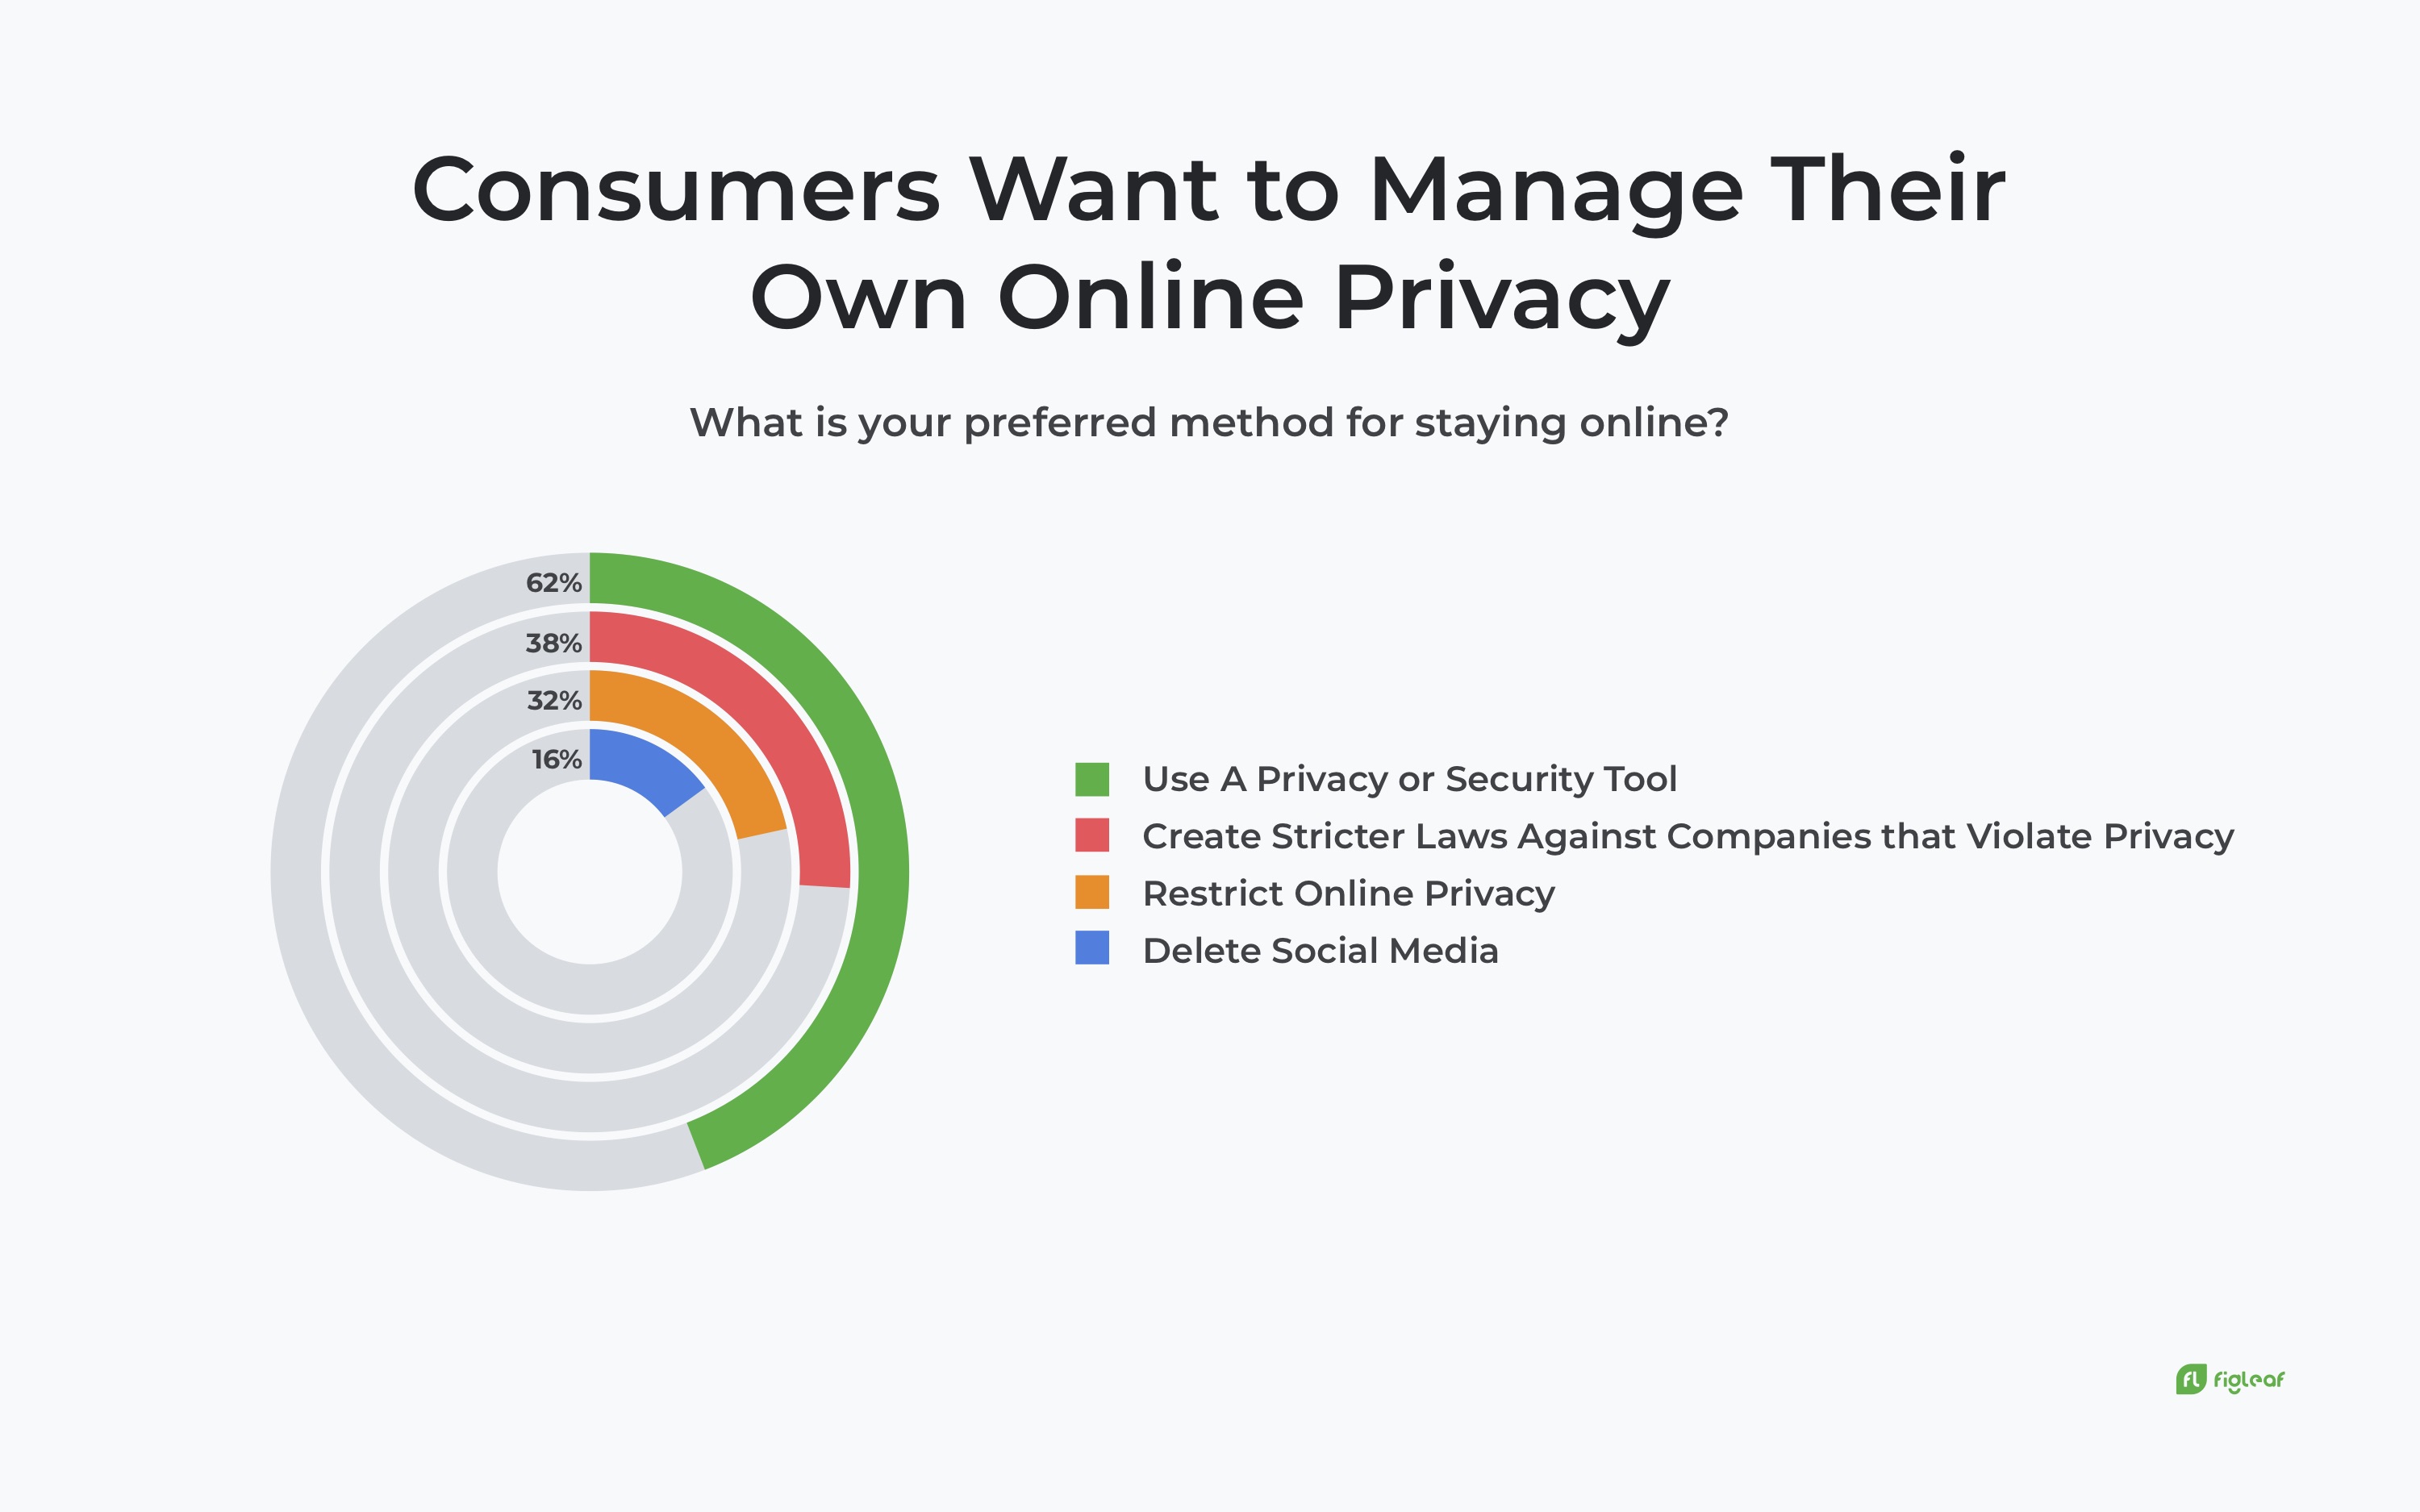 Consumers Want To Manage Their Own Online Privacy